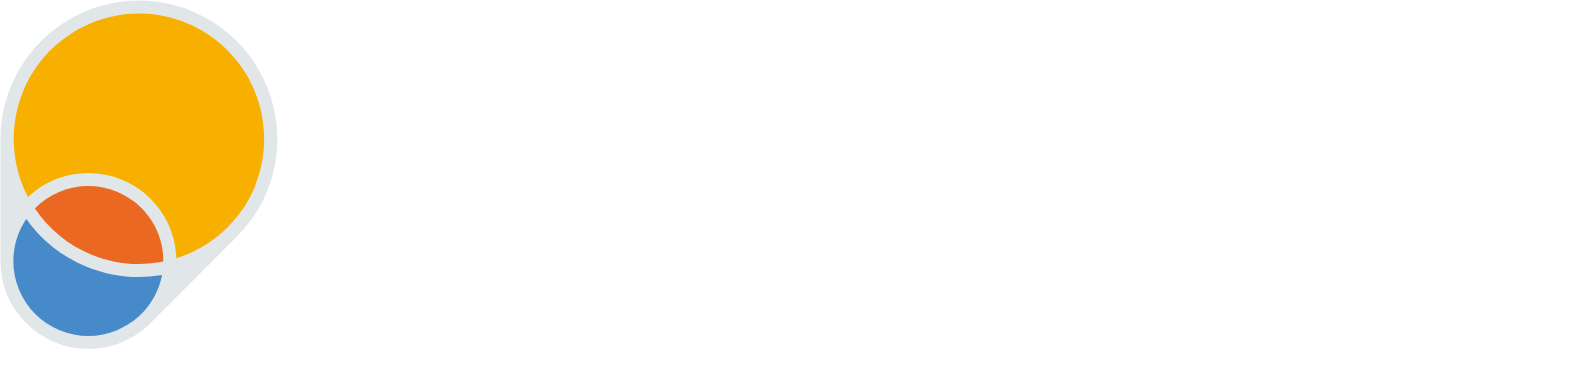 Molson Coors logo large for dark backgrounds (transparent PNG)